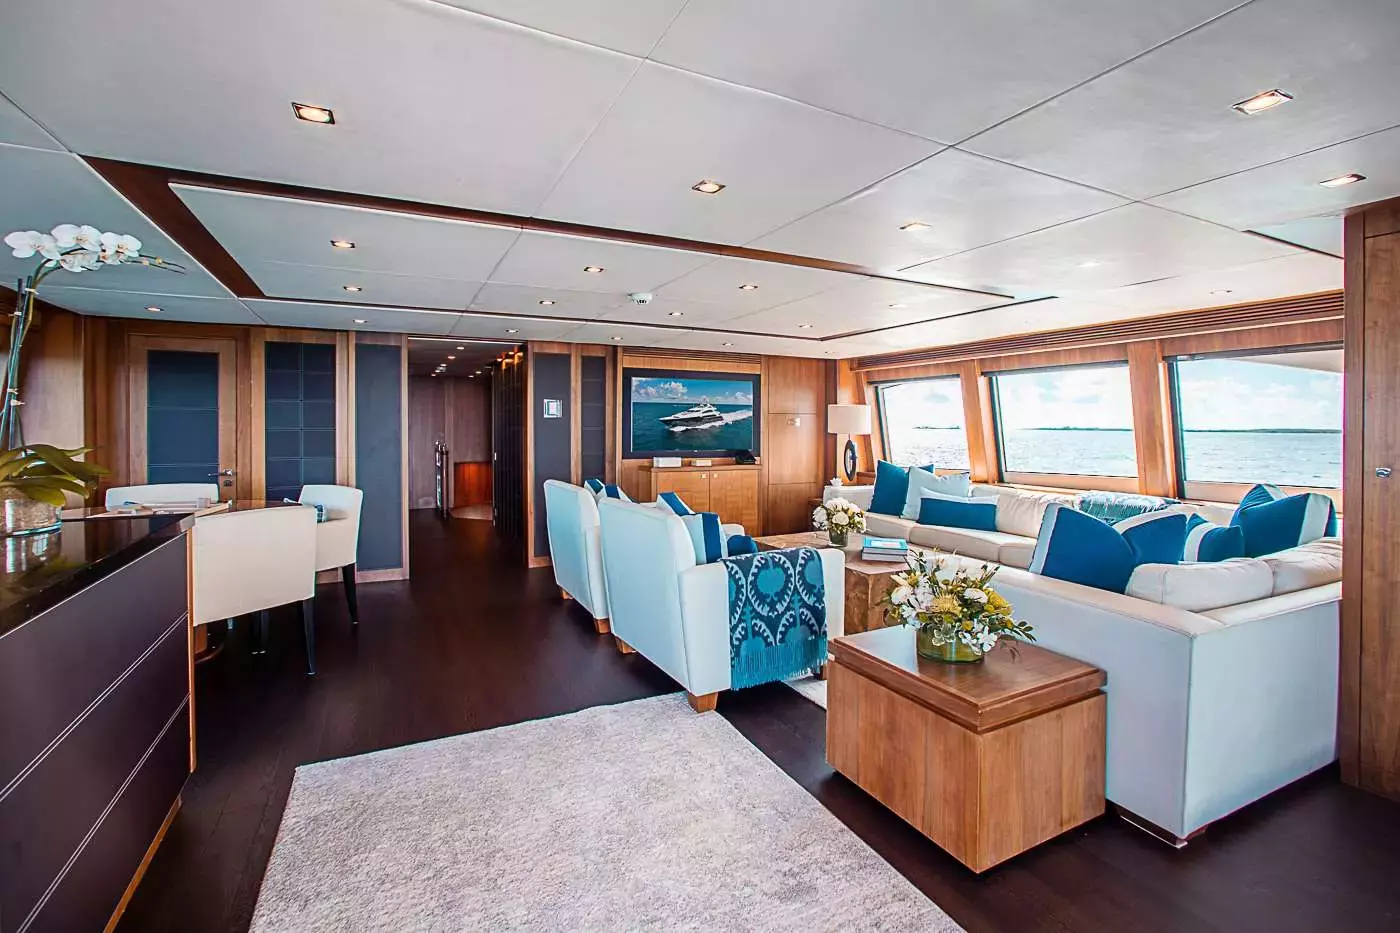 Acacia by Sunseeker - Top rates for a Charter of a private Superyacht in Turks and Caicos